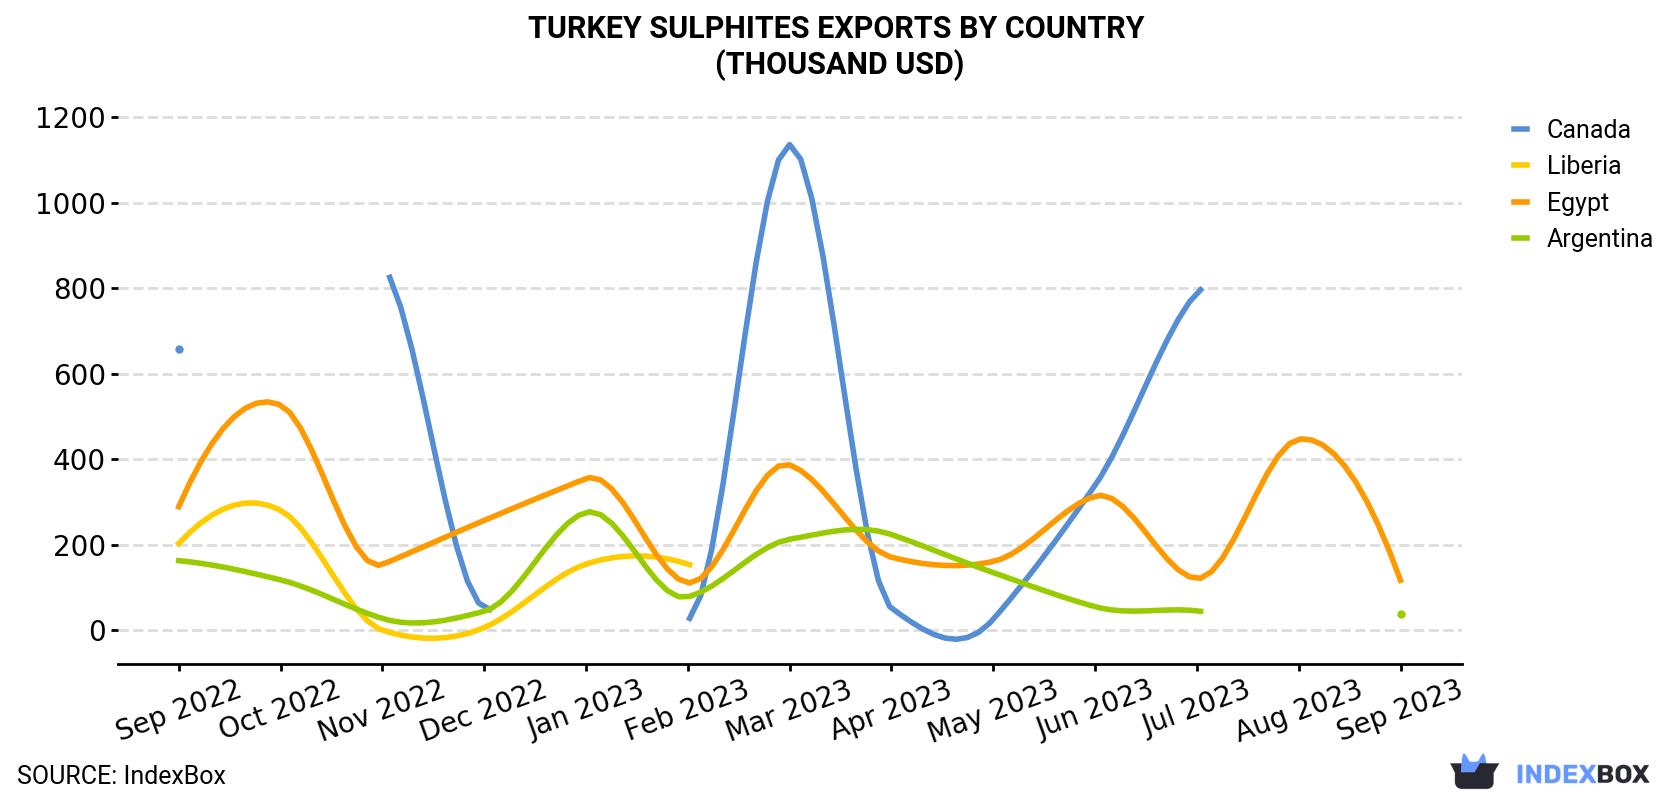 Turkey Sulphites Exports By Country (Thousand USD)